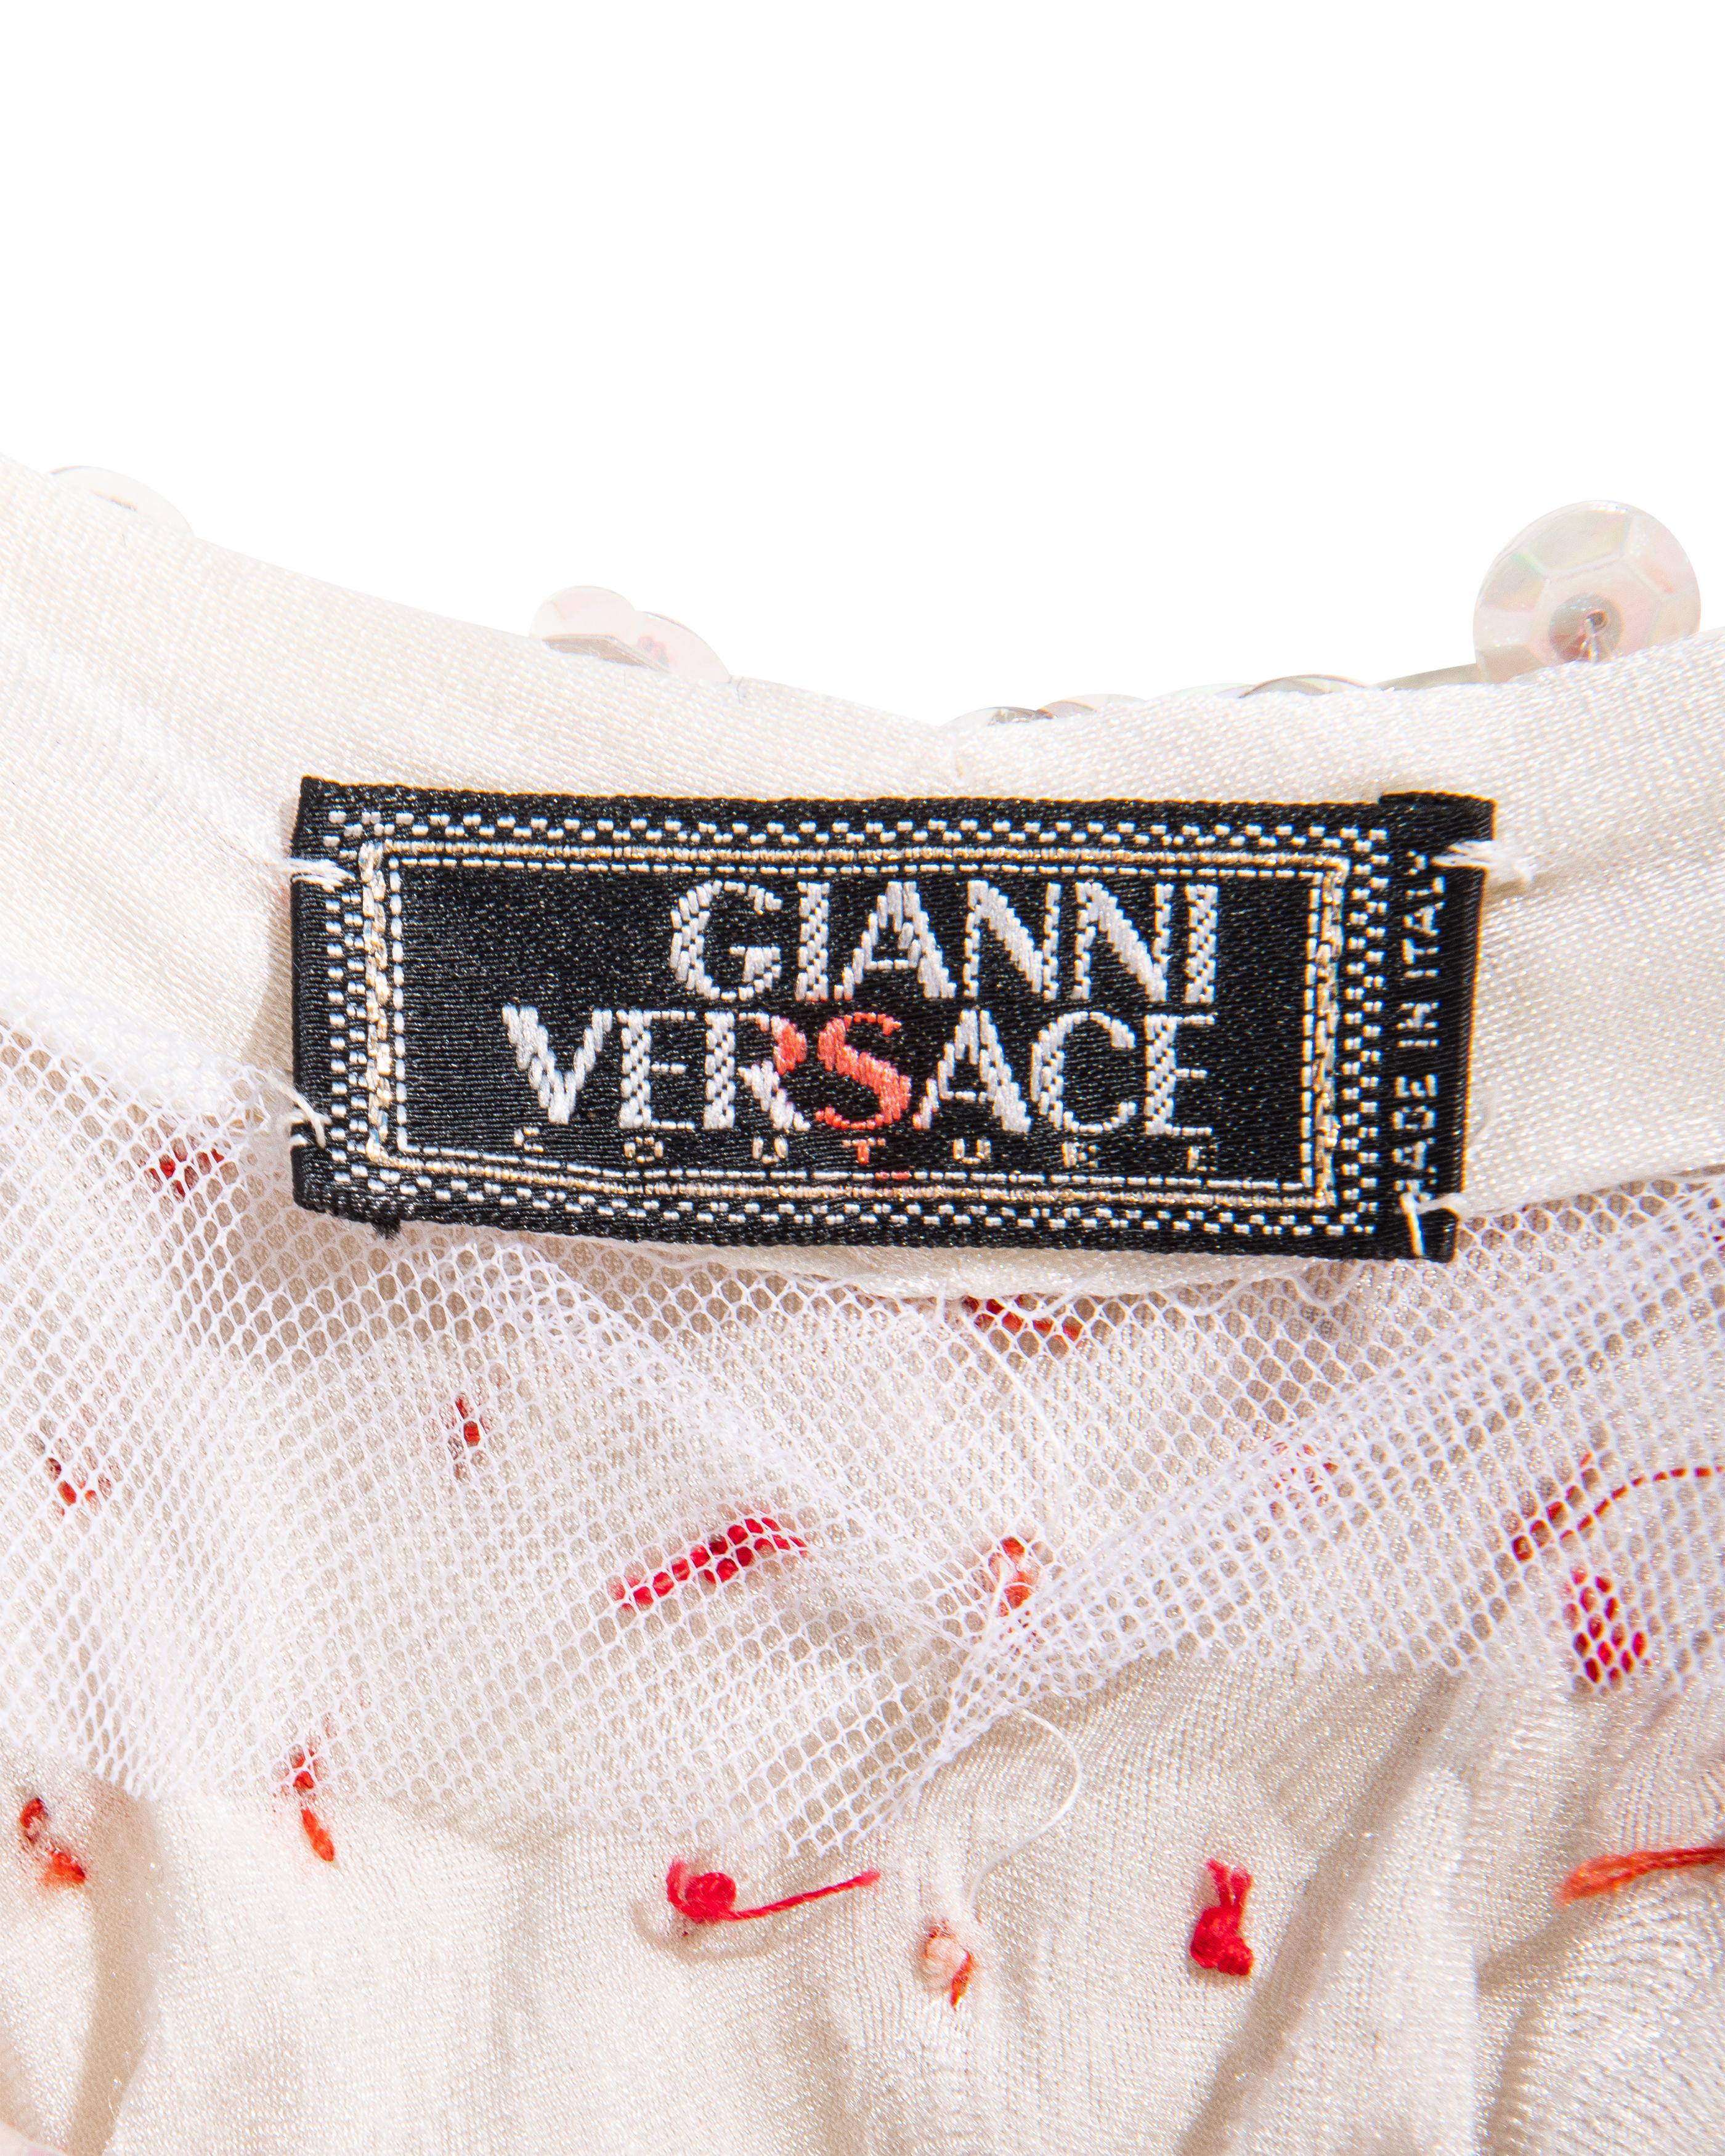 S/S 1995 Gianni Versace Soft White Embellished Gown 11